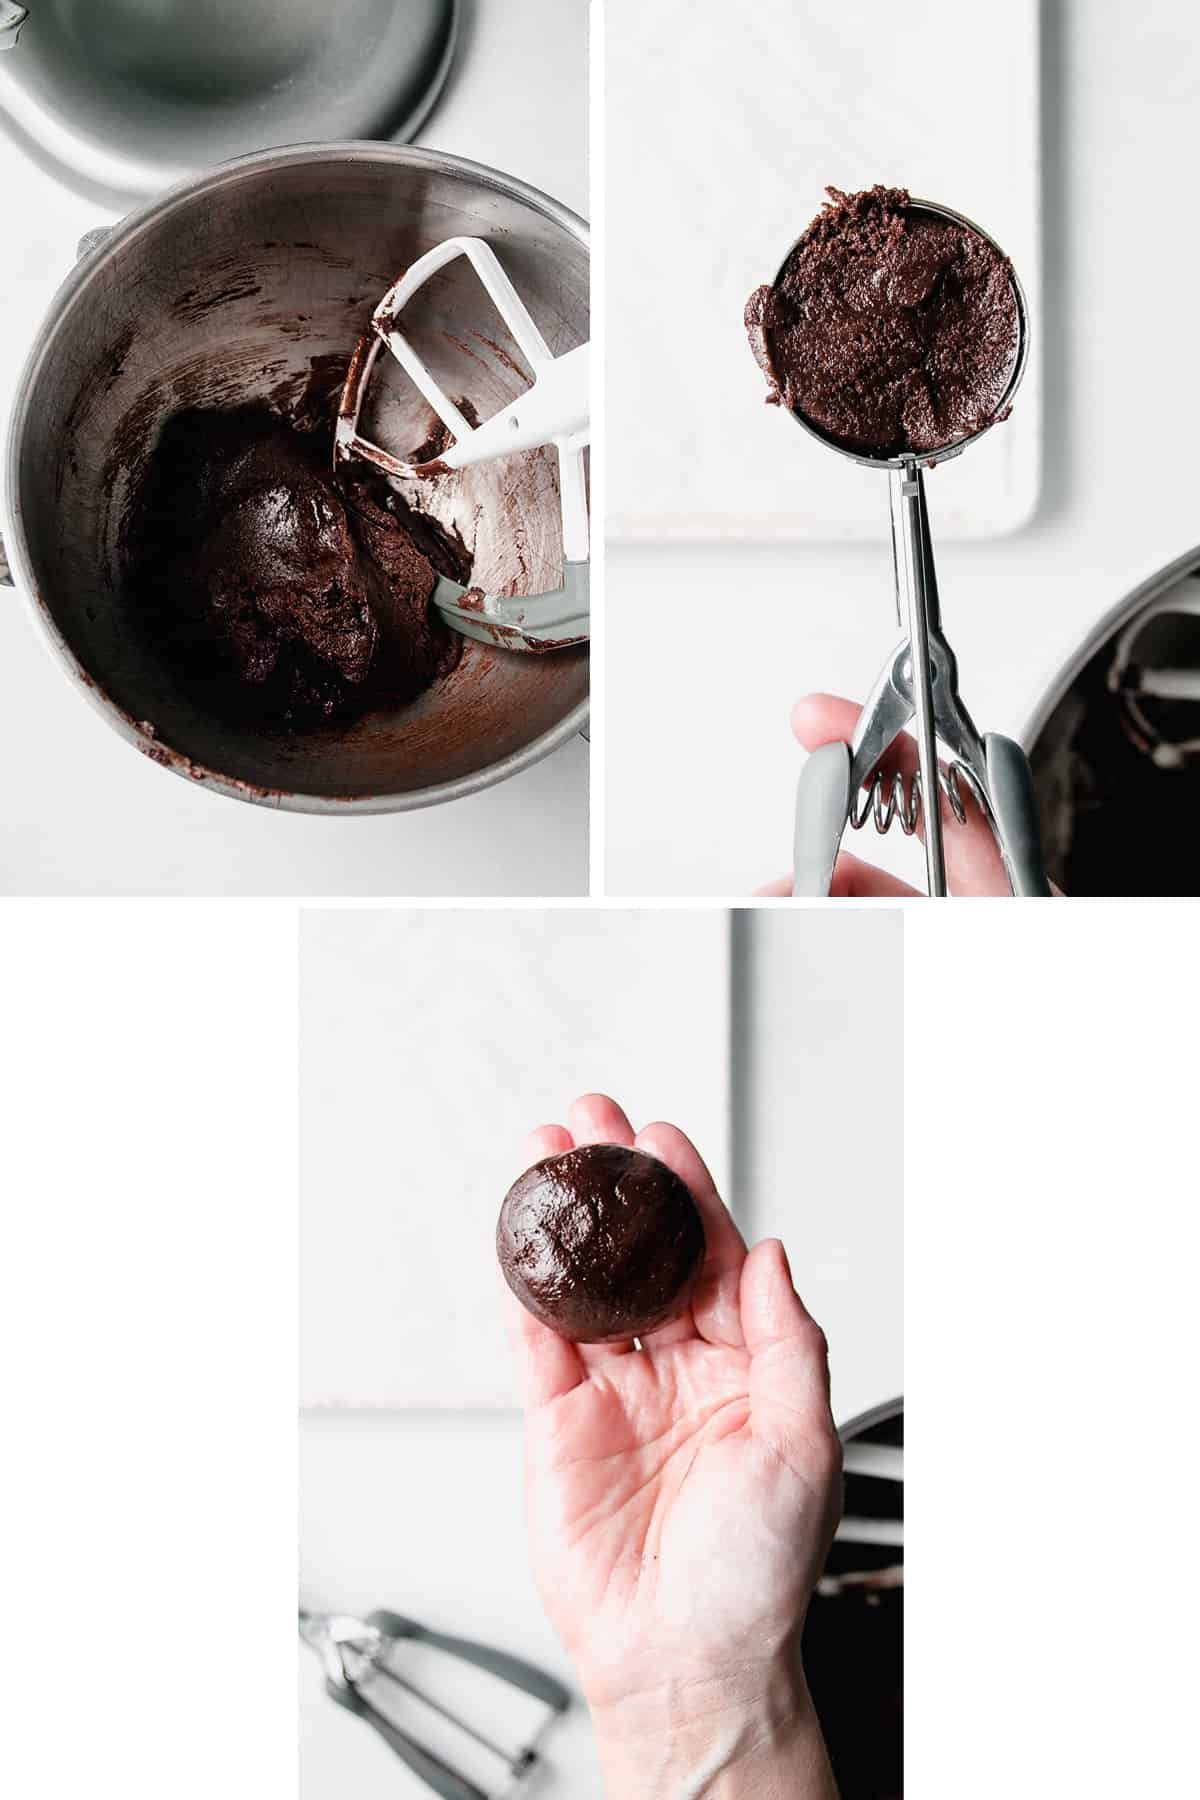 Image collage: chocolate dough in bowl, in cookie scoop, and formed into a ball resting on a hand.